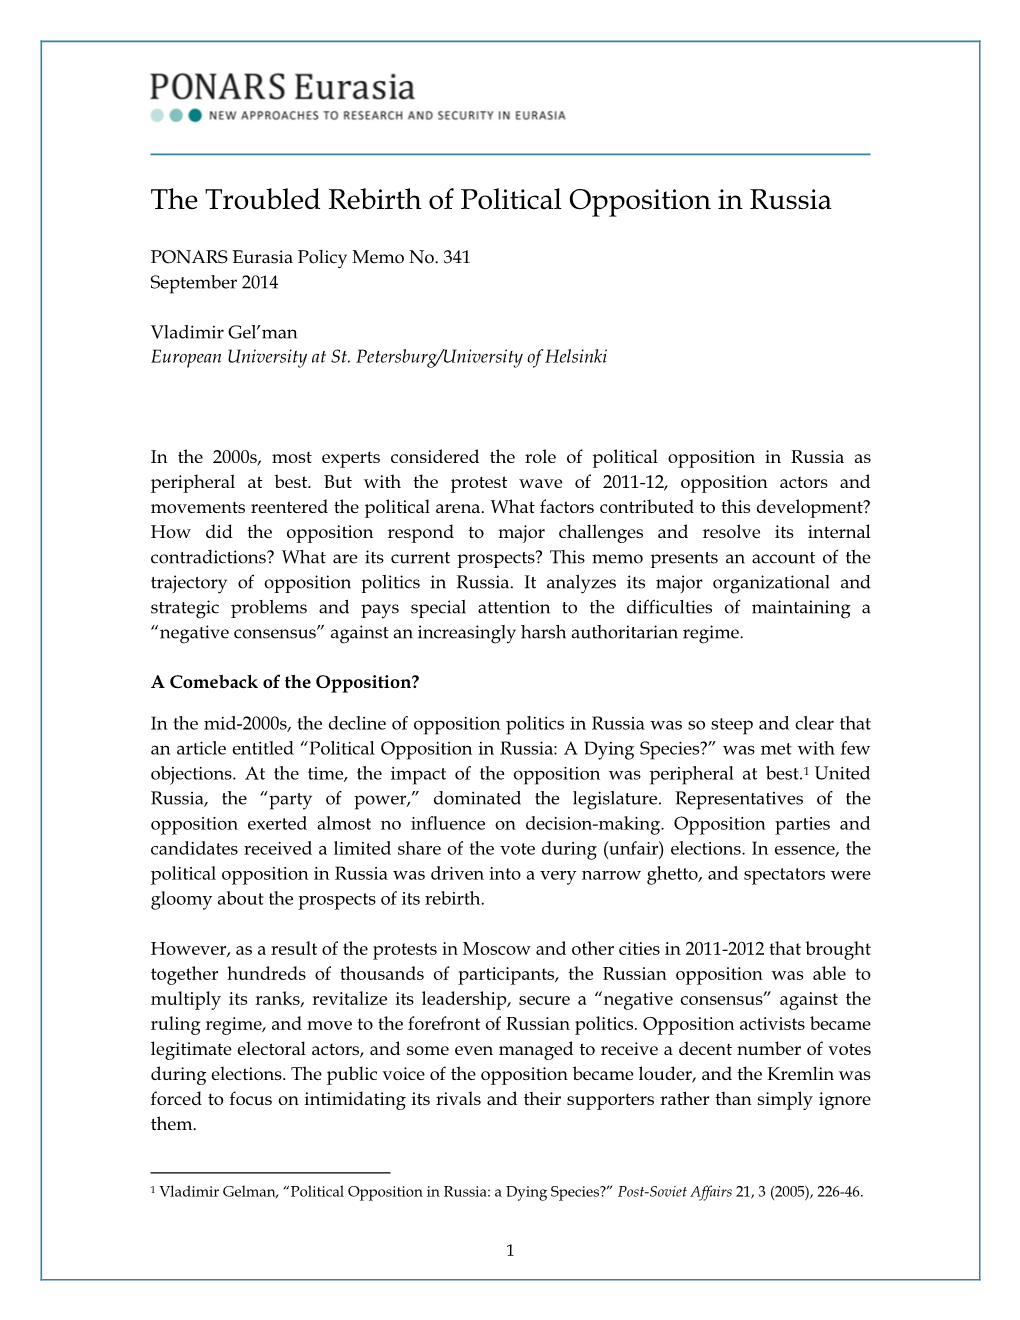 The Troubled Rebirth of Political Opposition in Russia